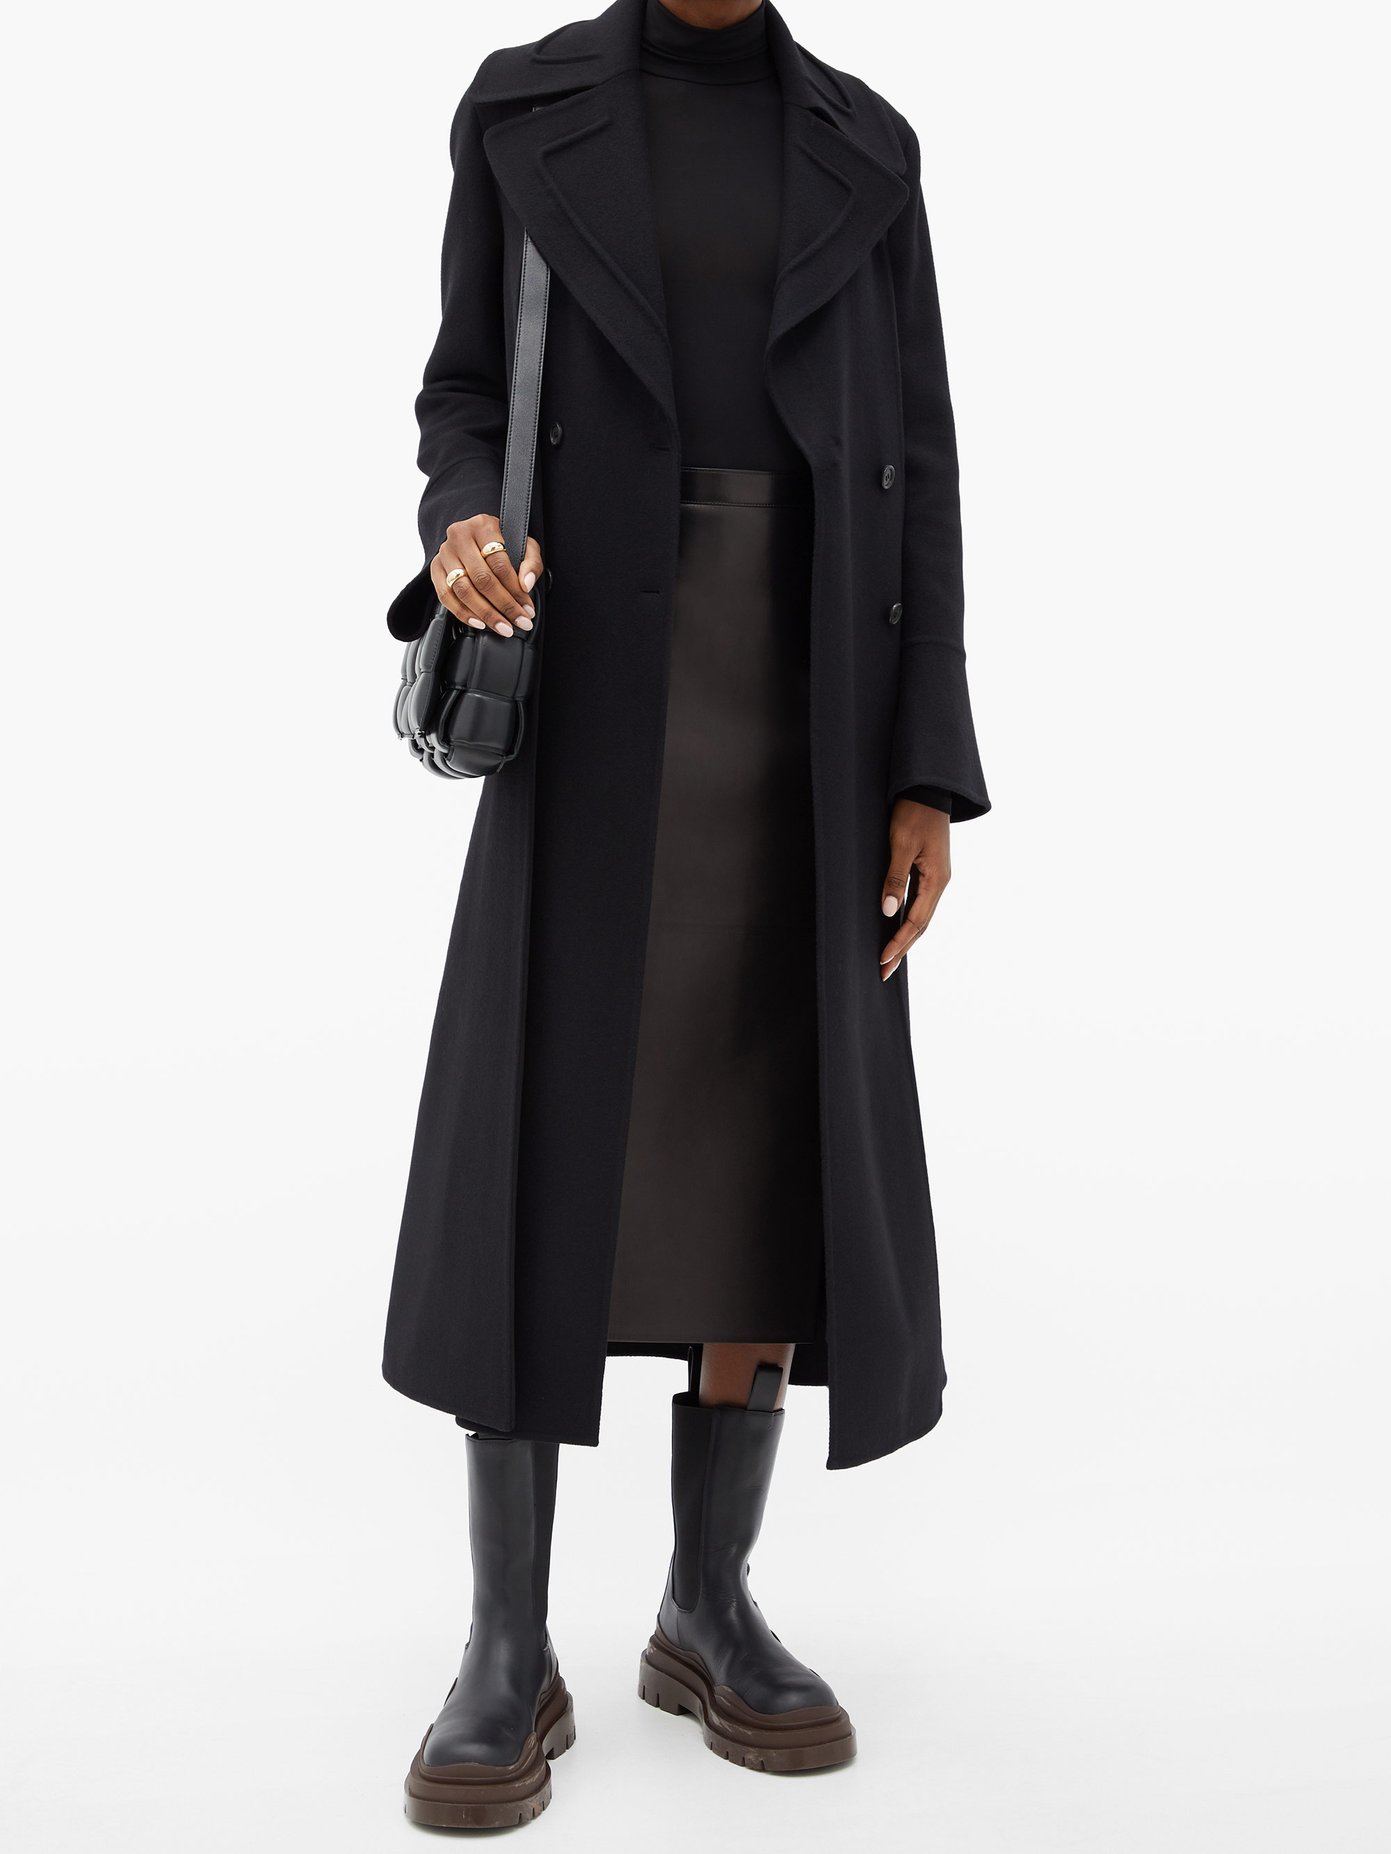 https://assetsprx.matchesfashion.com/img/product/outfit_1382150_1_zoom.jpg